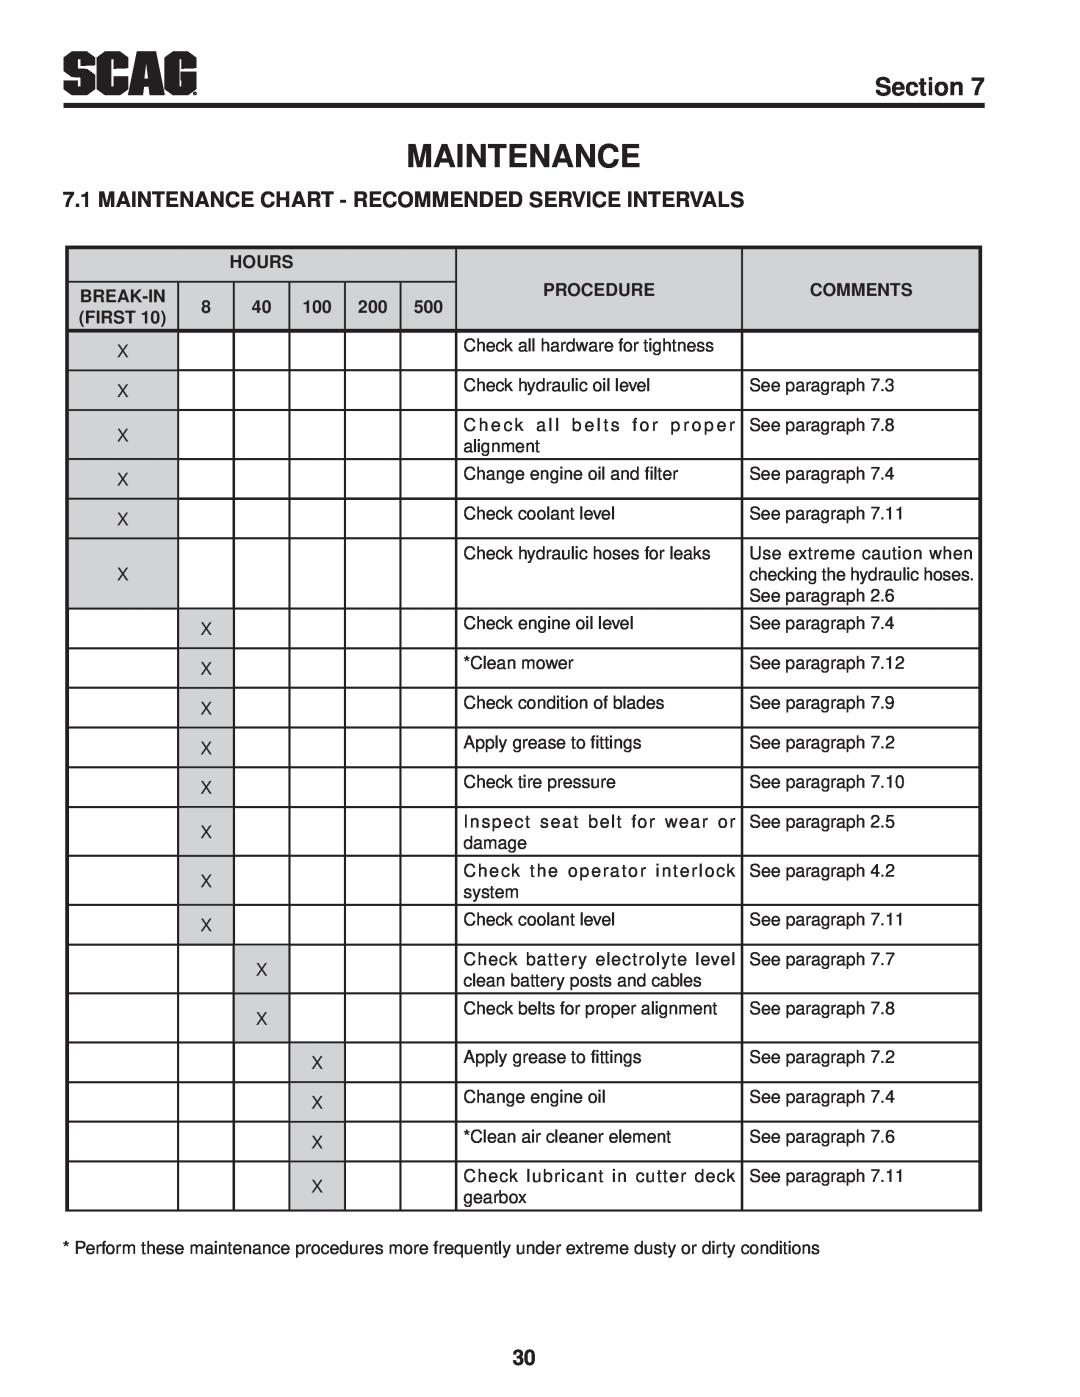 Scag Power Equipment STT61V-31EFI-SS manual Maintenance Chart - Recommended Service Intervals, Section 